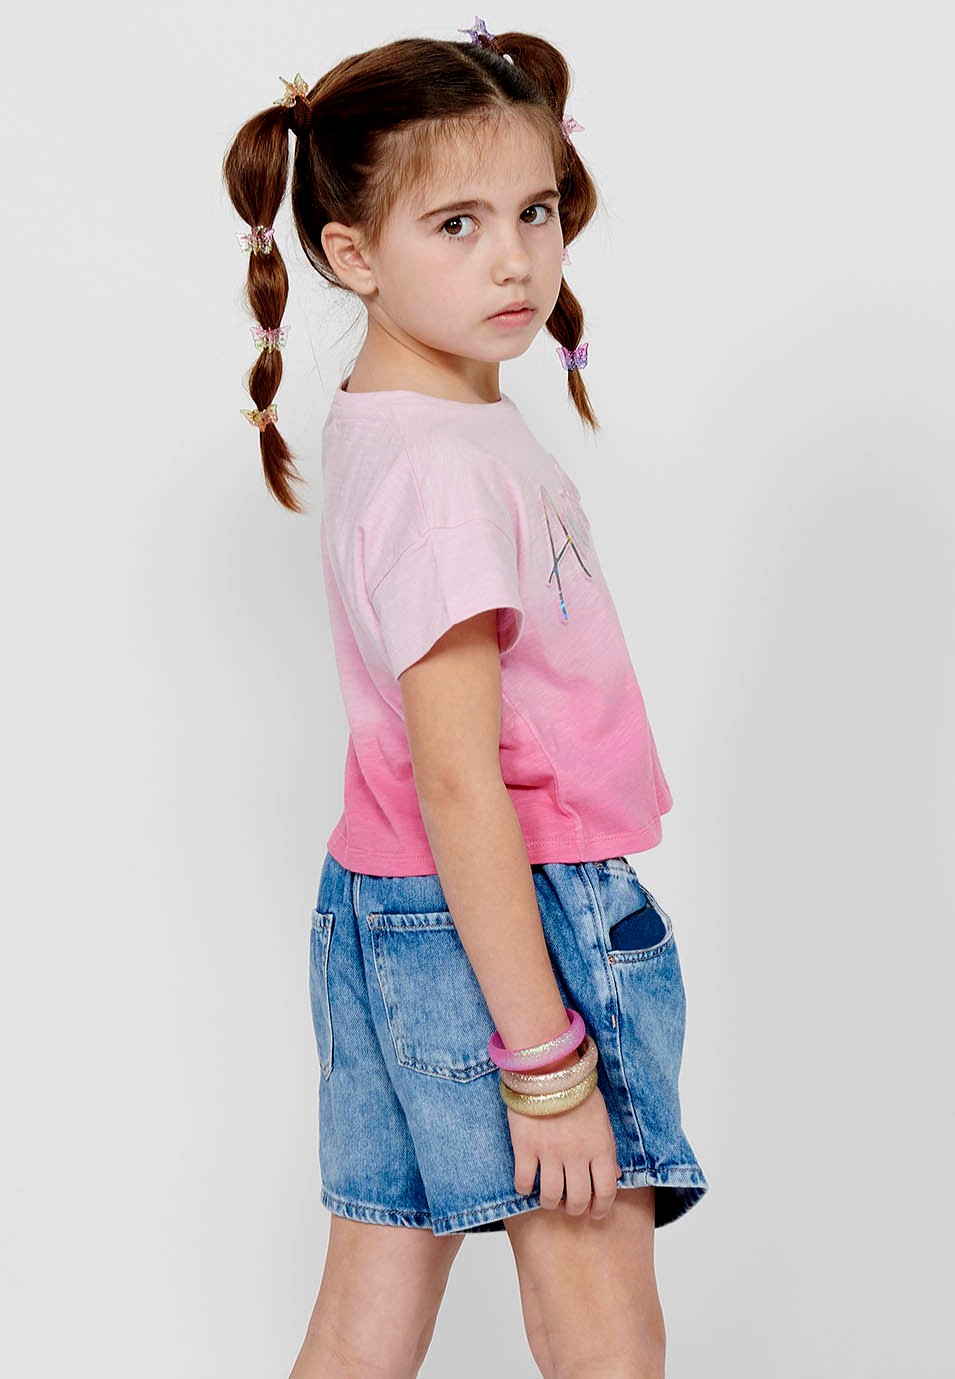 Short-sleeved T-shirt Cotton Top with Round Neck and Front Letters with Pink Volume for Girls 6